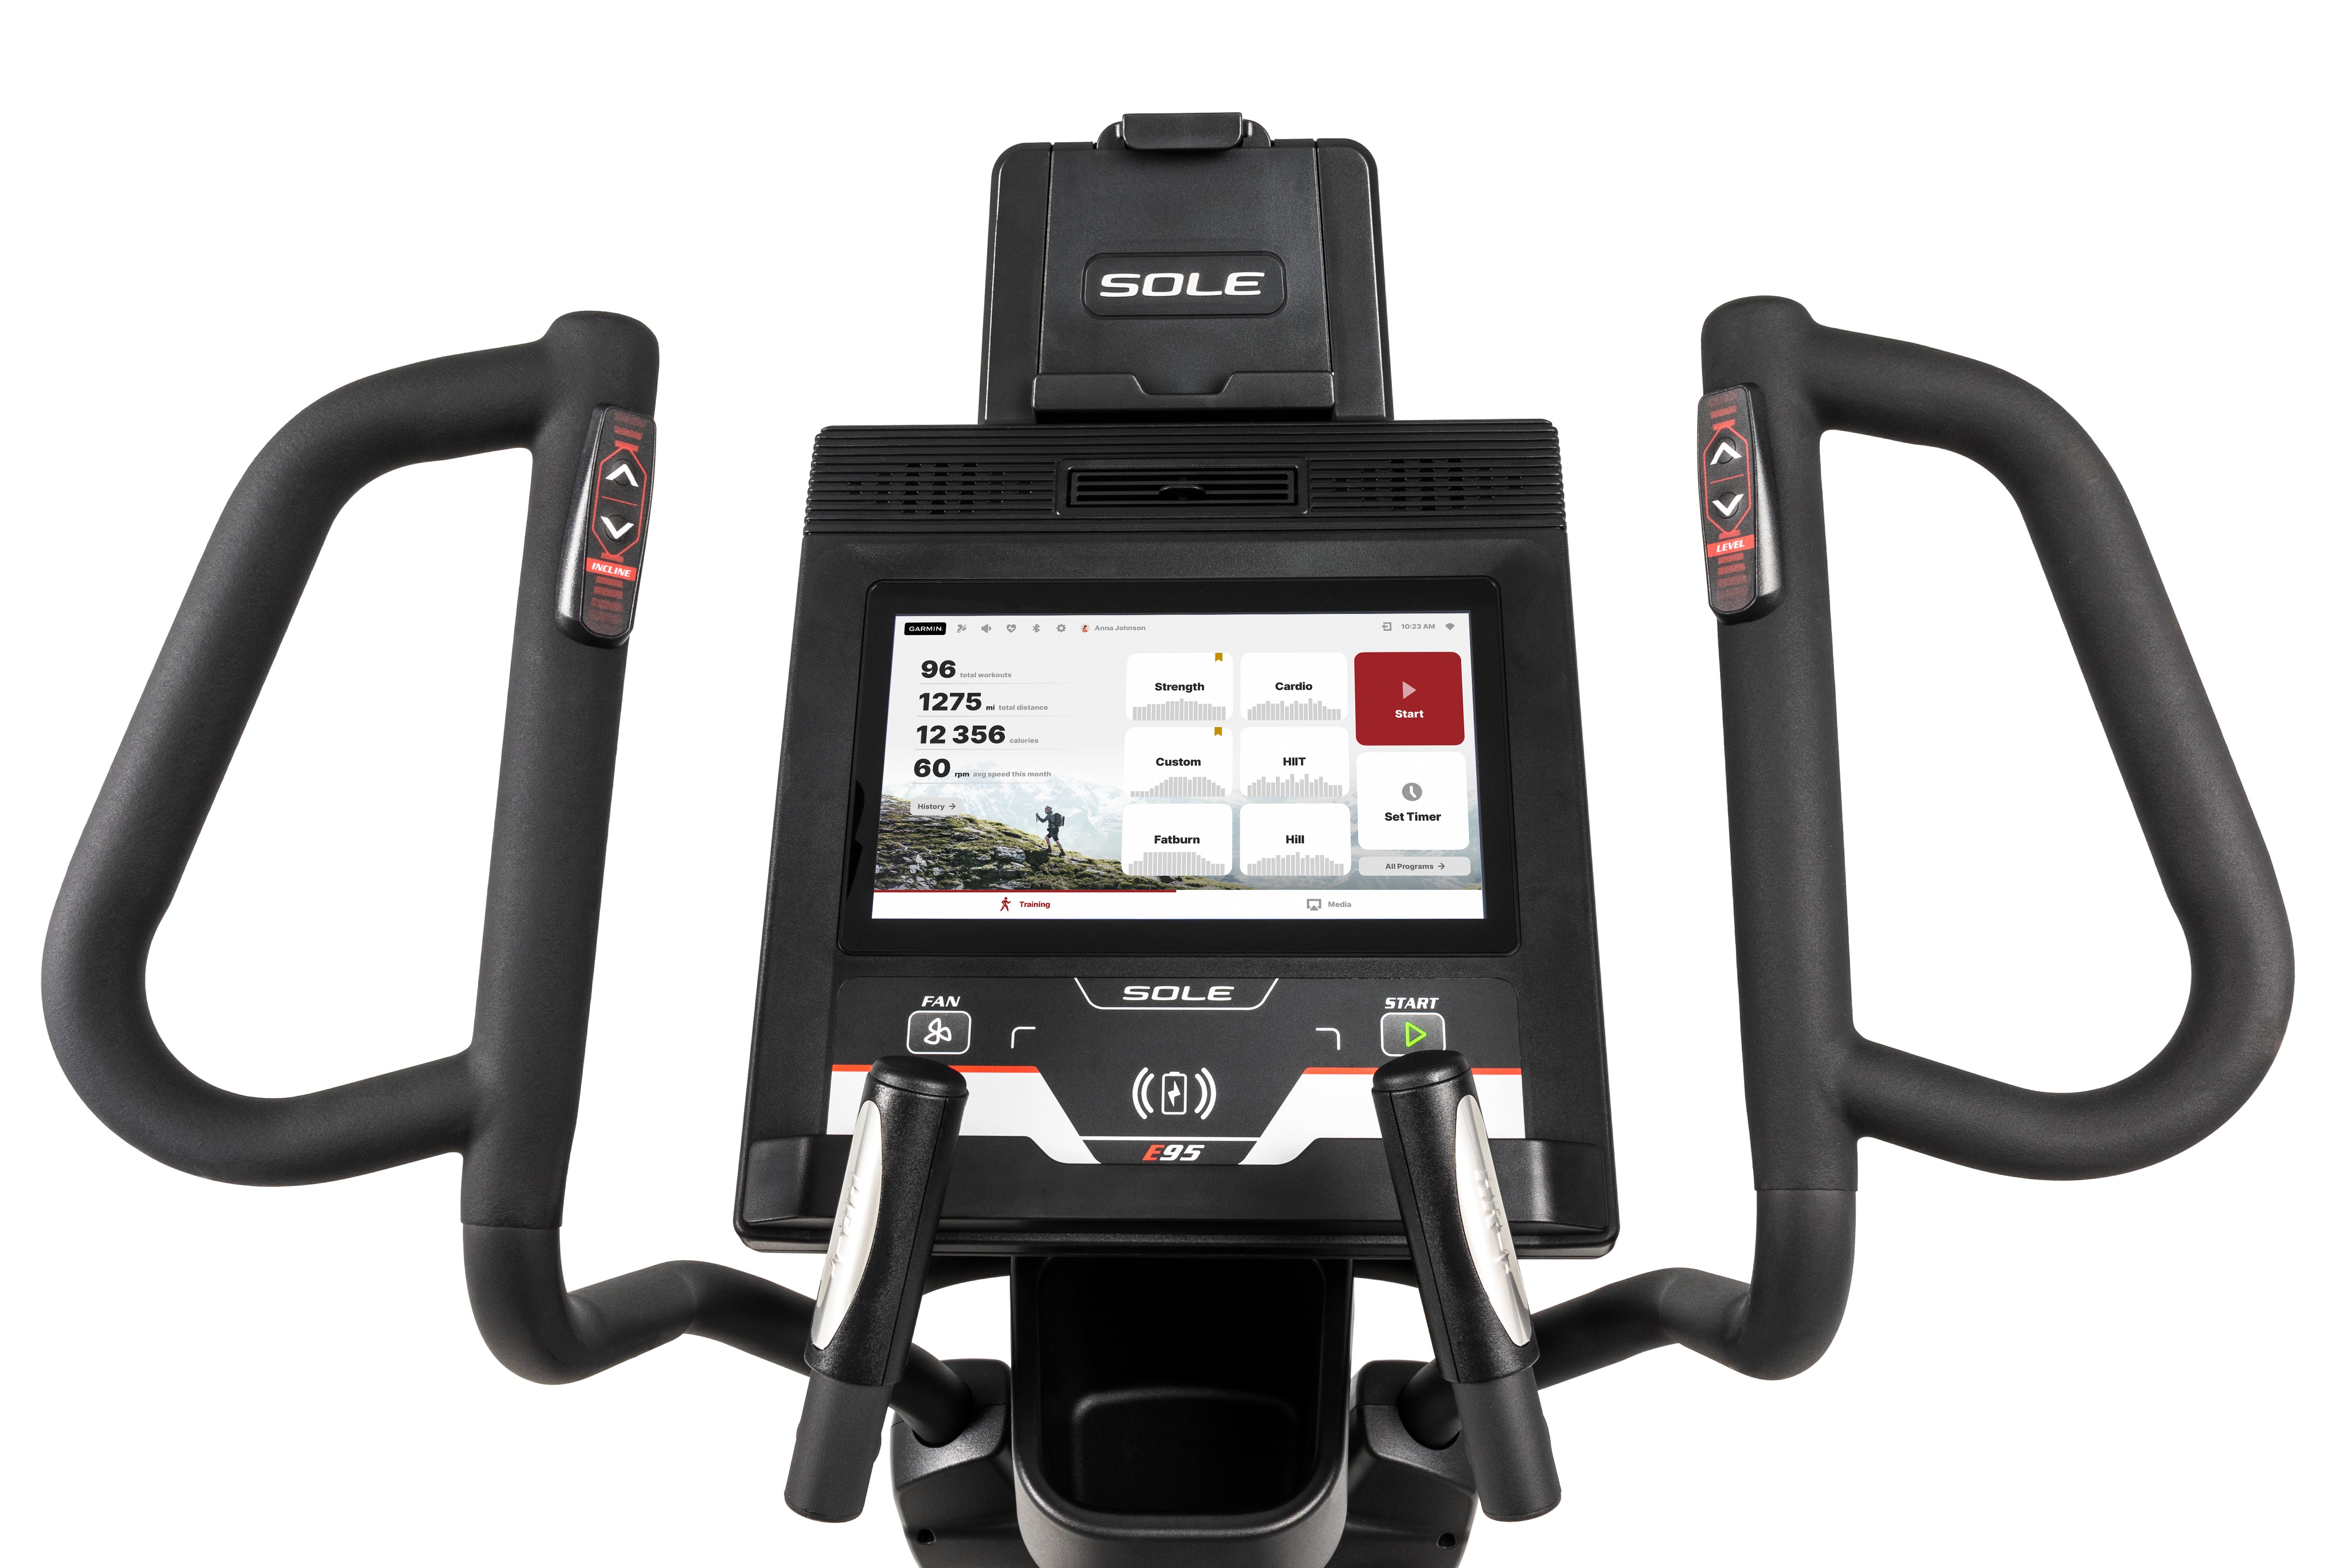 Close-up view of the Sole E95 elliptical trainer's console, highlighting its large touchscreen display with various workout metrics, buttons labeled 'FAN', 'DISPLAY', 'START', and 'STOP', and the 'SOLE' branding on the upper tablet holder and the 'E95' label on the lower console. The image also showcases the curved handlebars with heart rate sensors and control buttons.